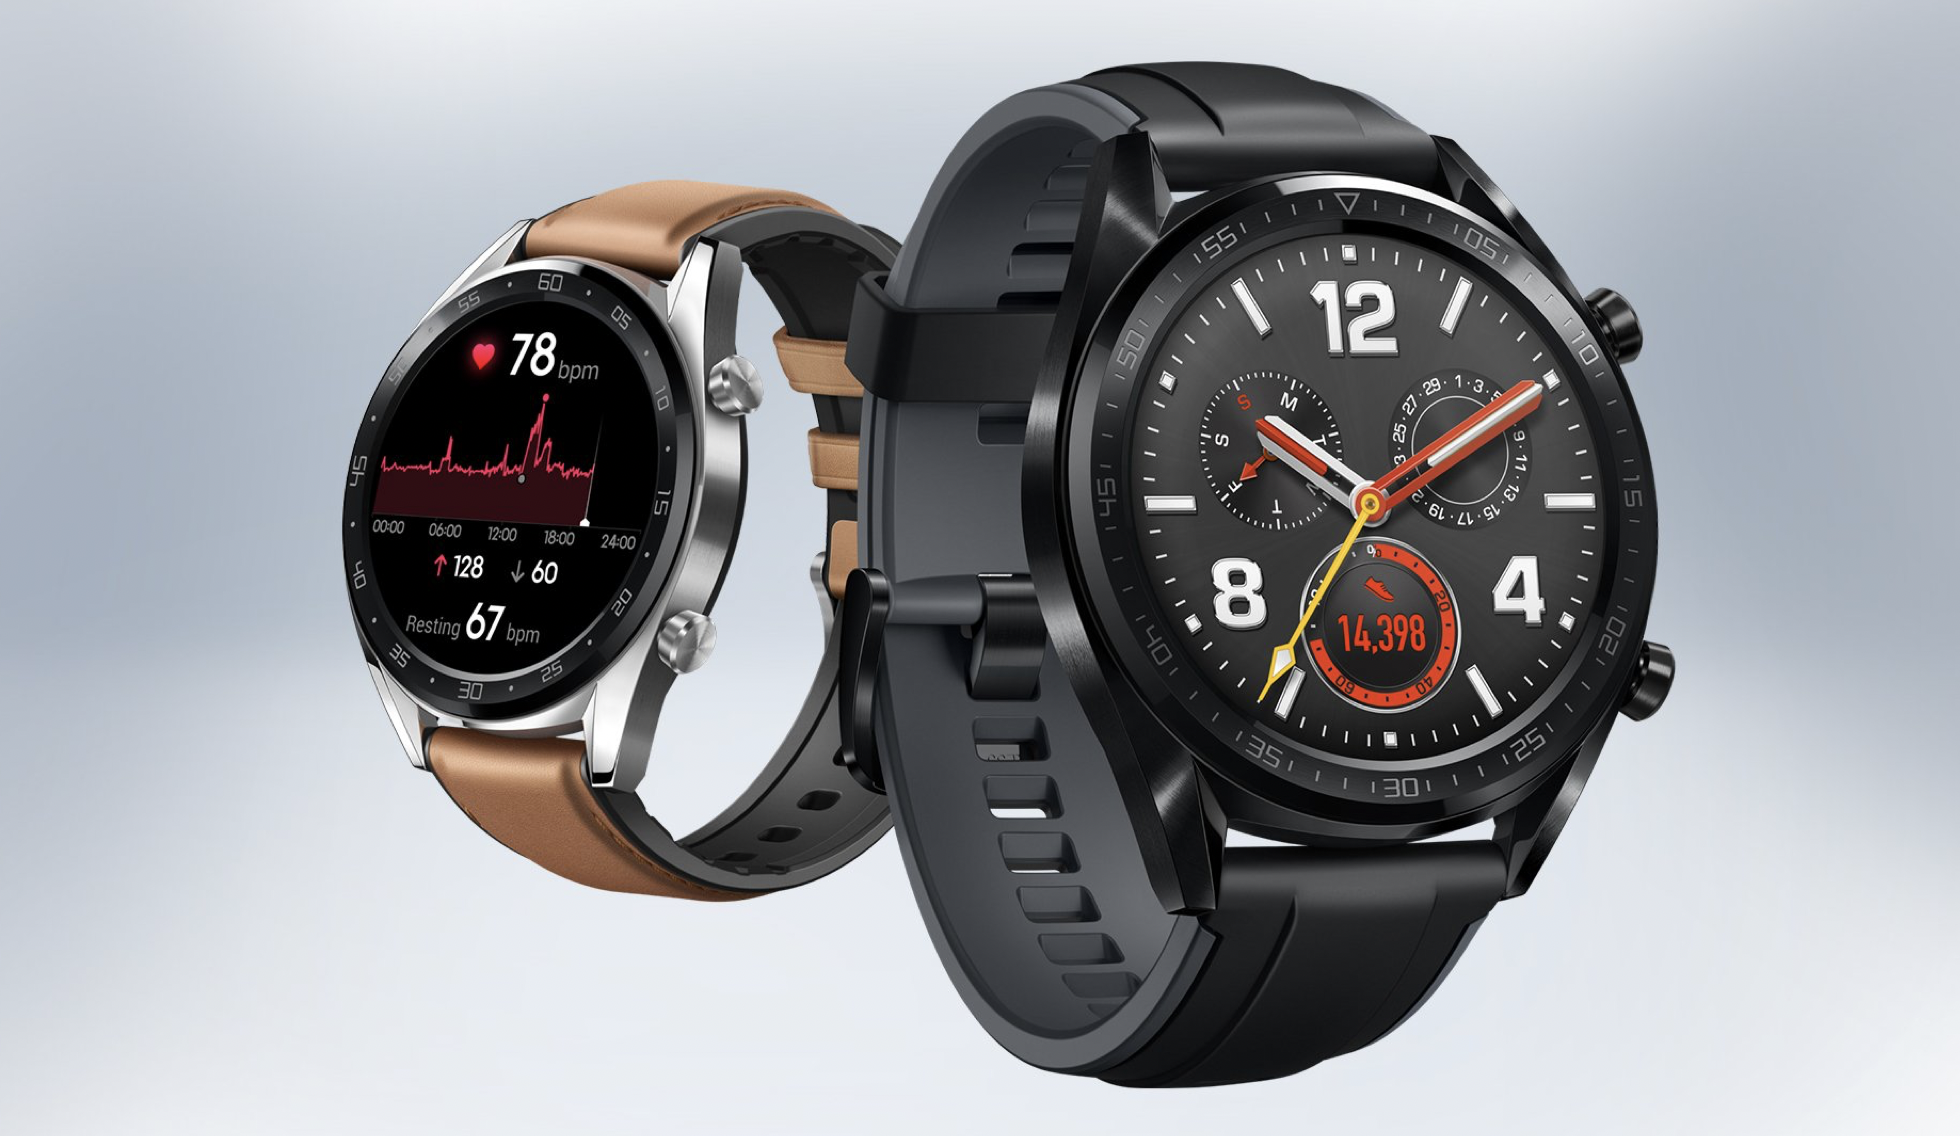 The new Huawei Watch GT has a claimed 30-day battery life - Gearbrain